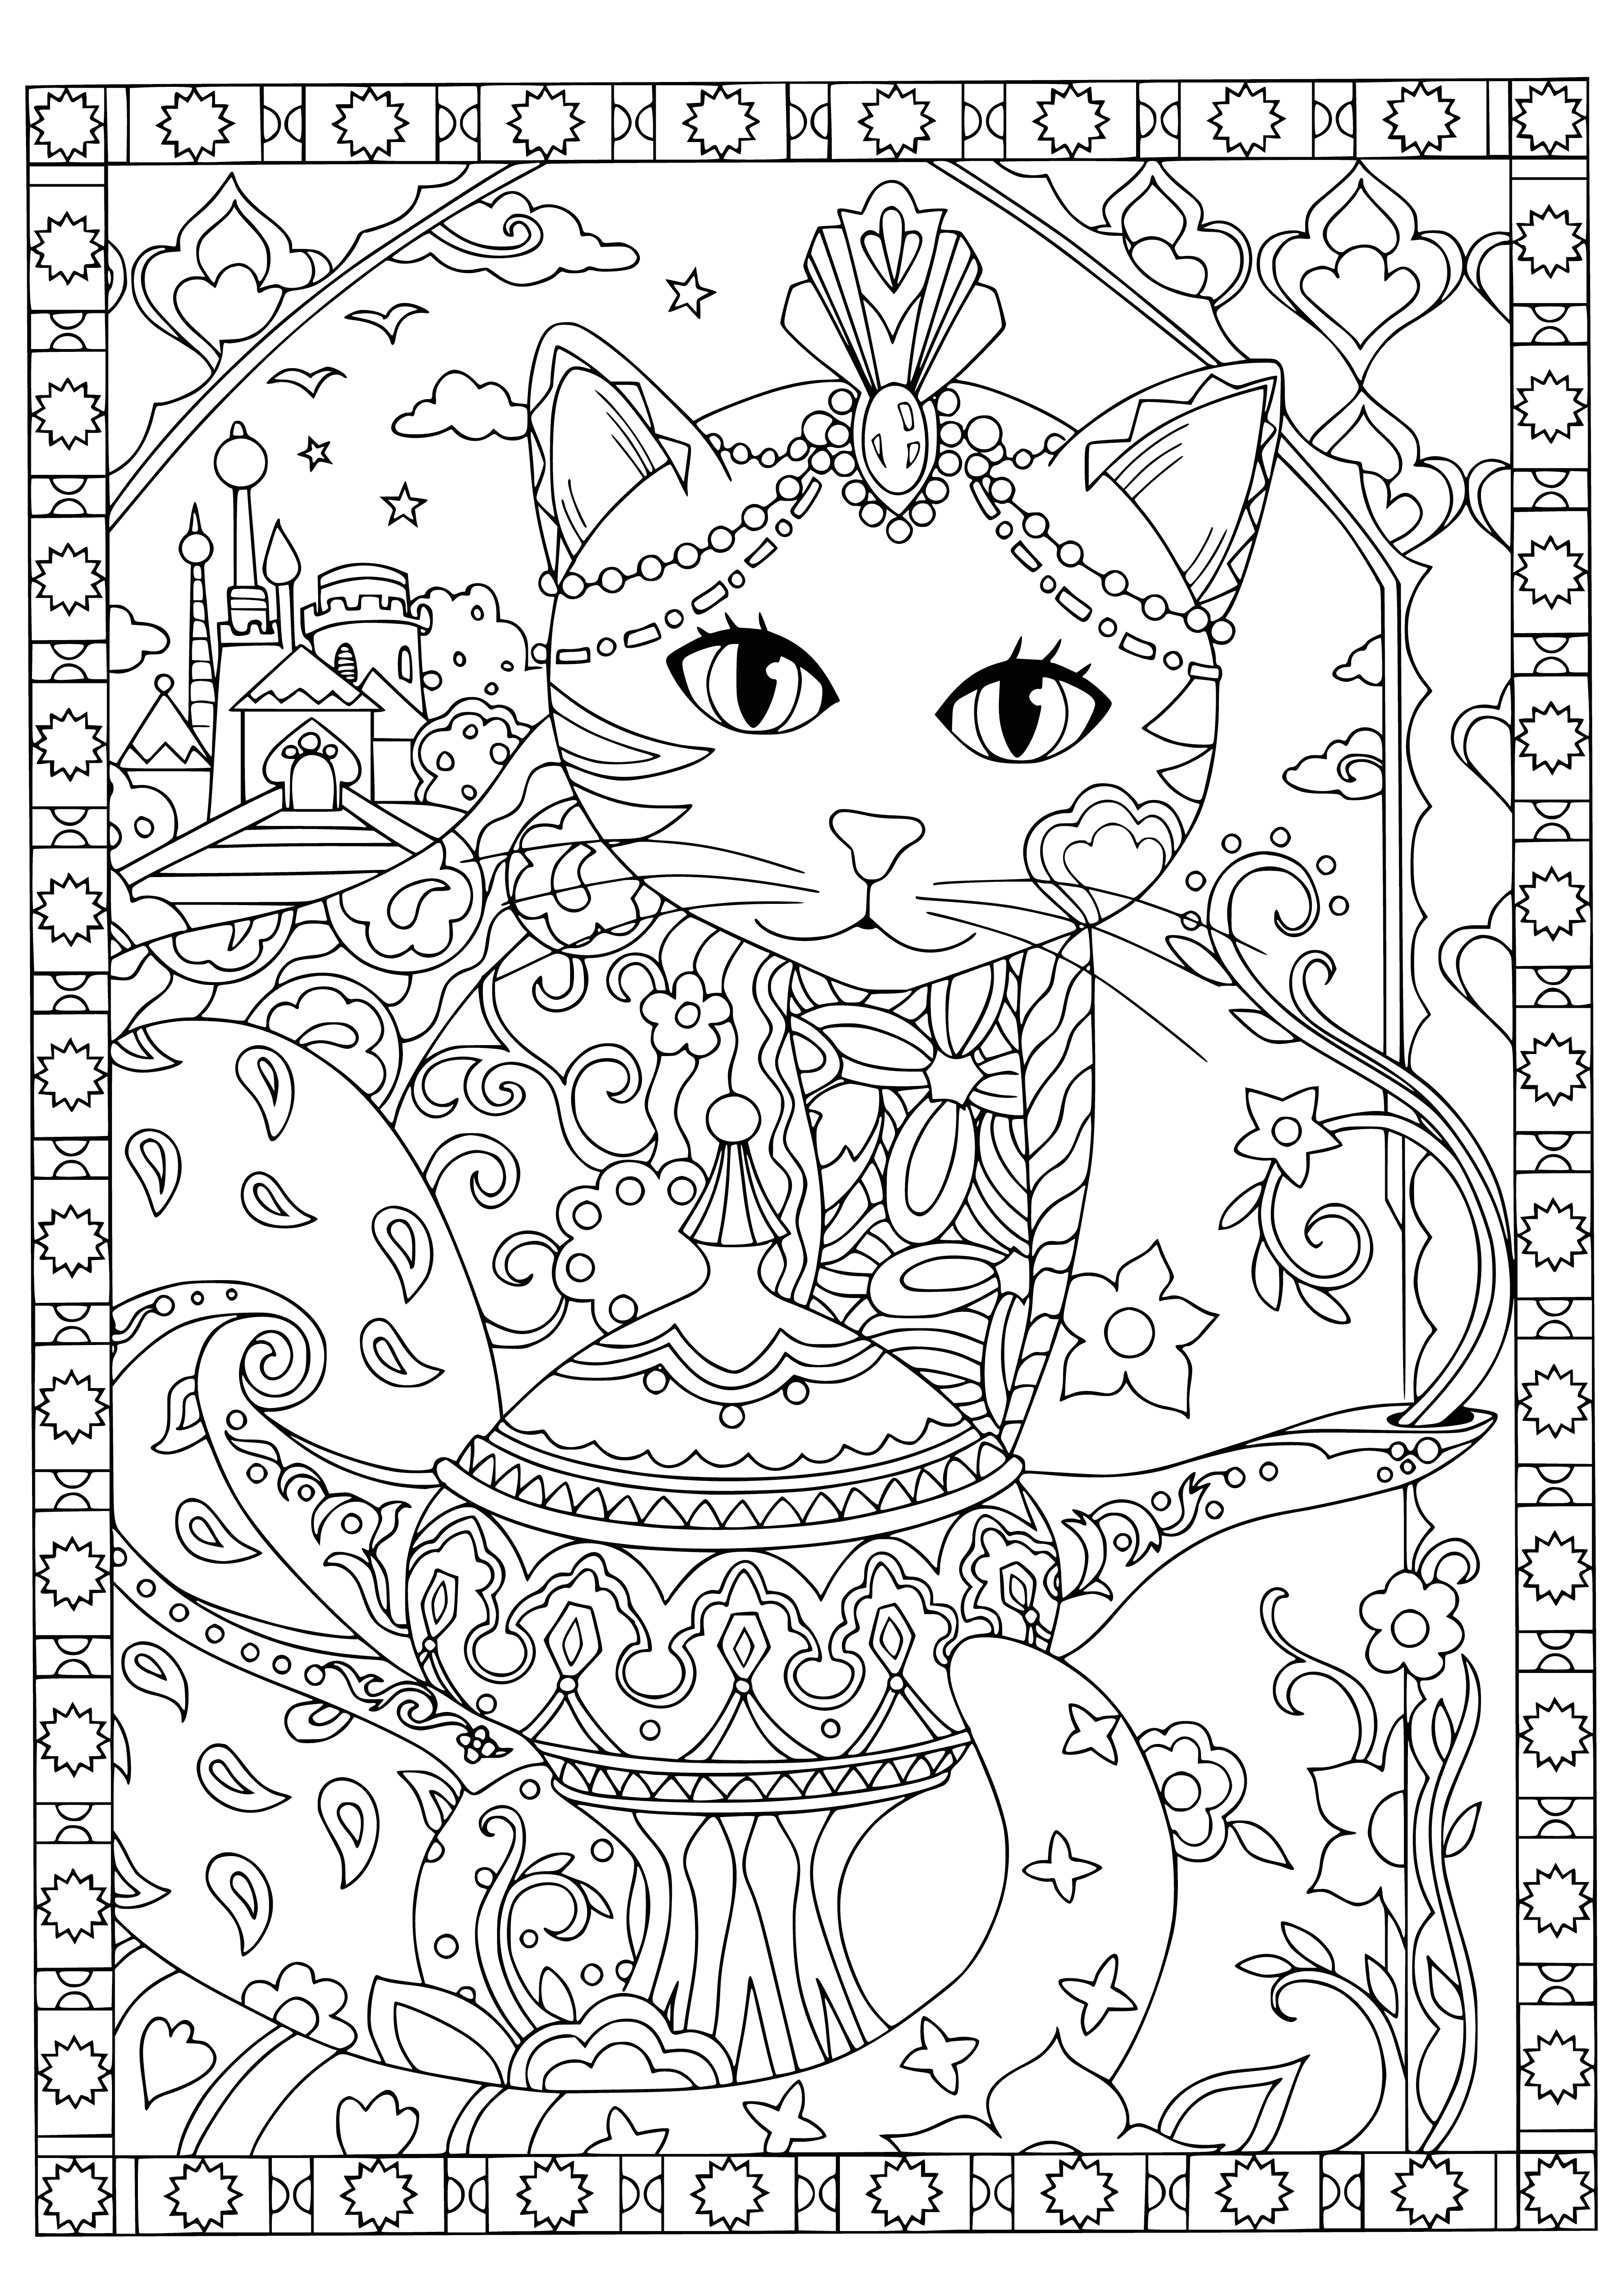 coloring page: Two cats sit either side of a low table with a teapot and two bowls, one full and one empty. One cat's paw in the empty bowl, the other reaching for the full bowl.